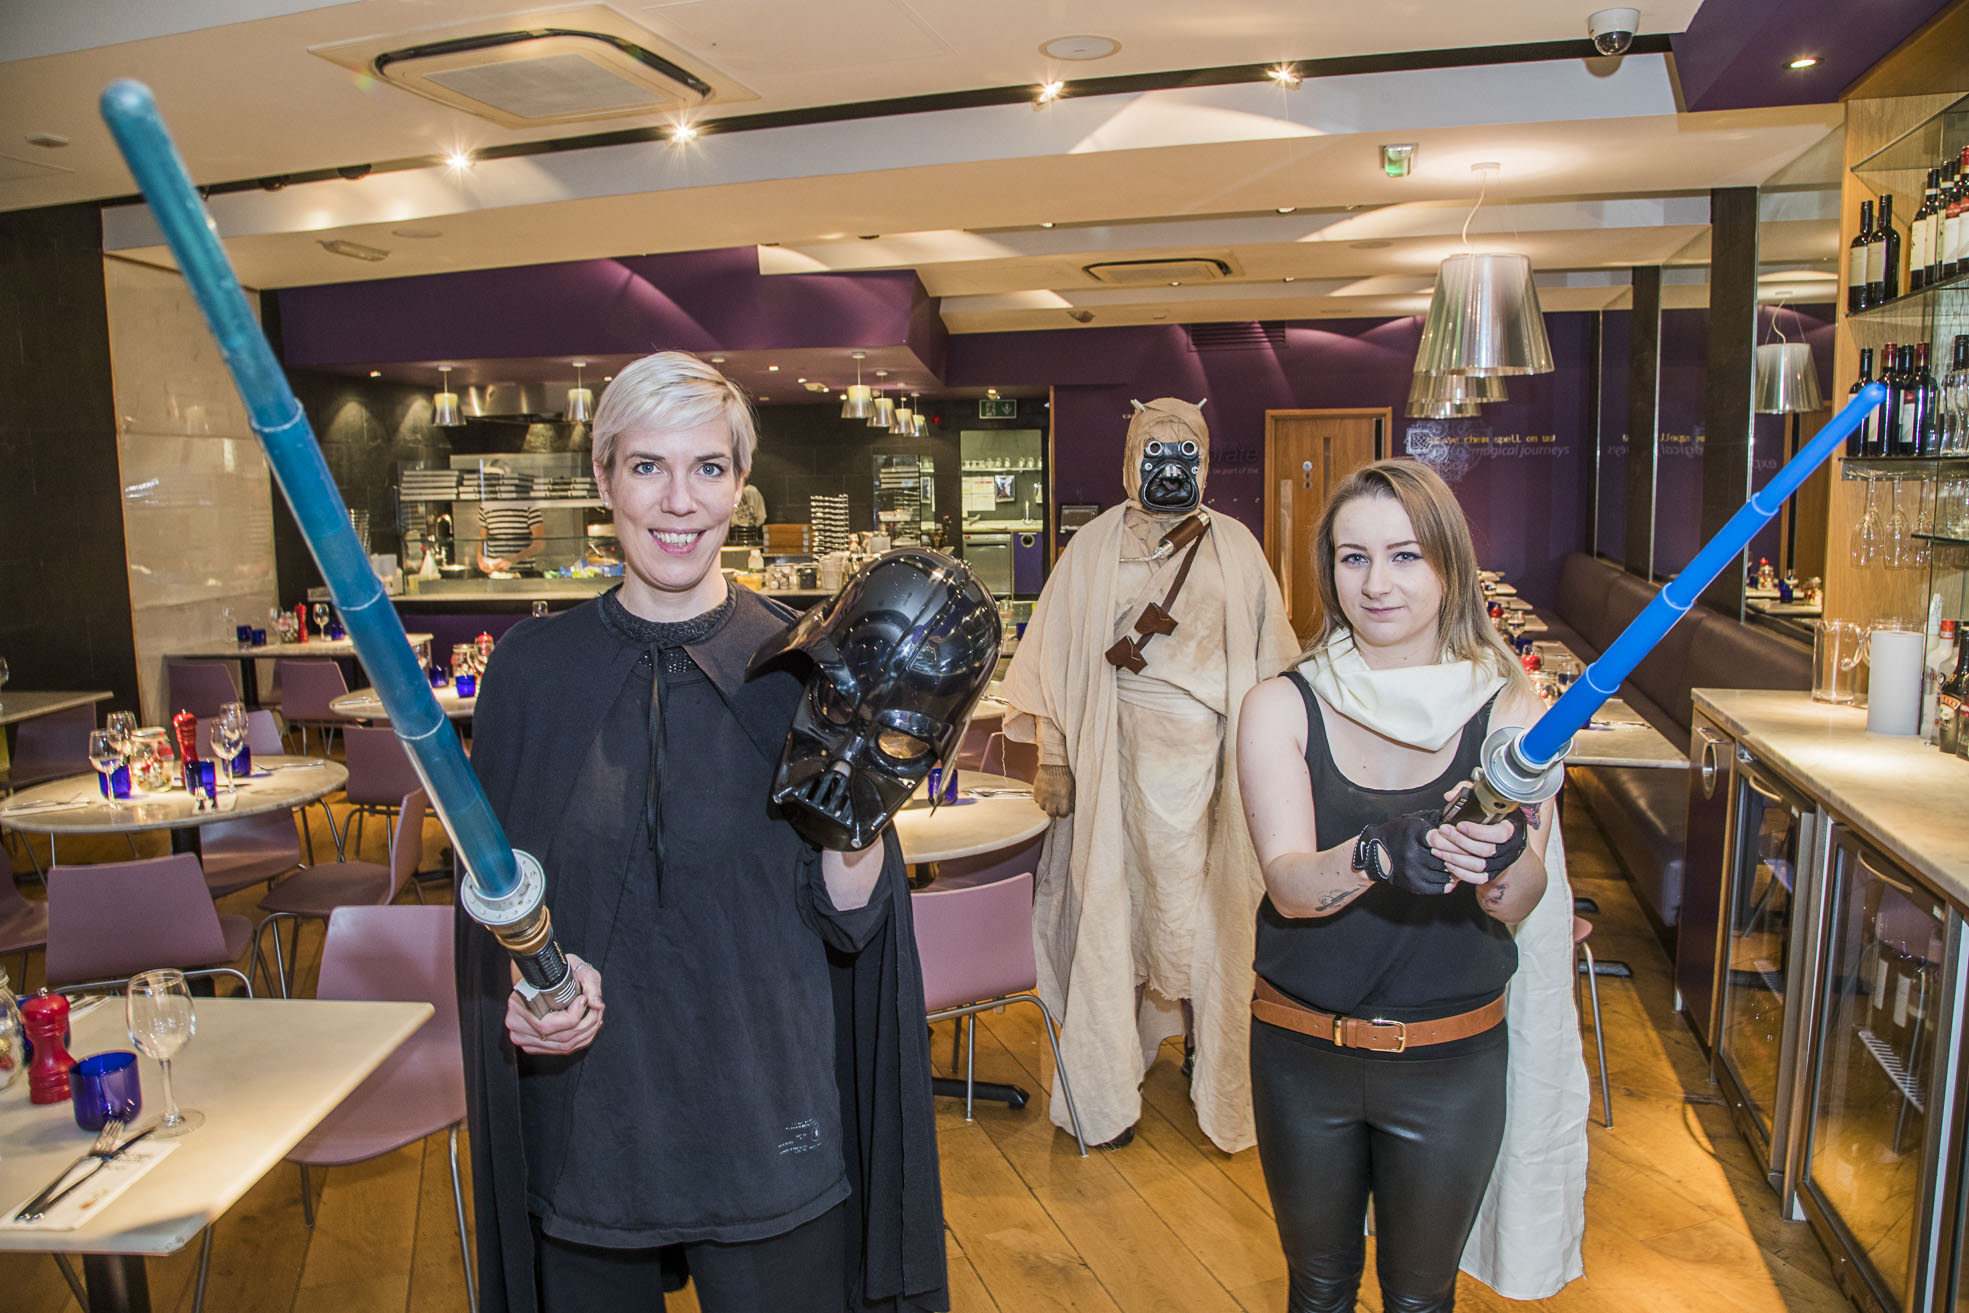 Restaurant staff call on The Force from Star Wars to battle cancer 